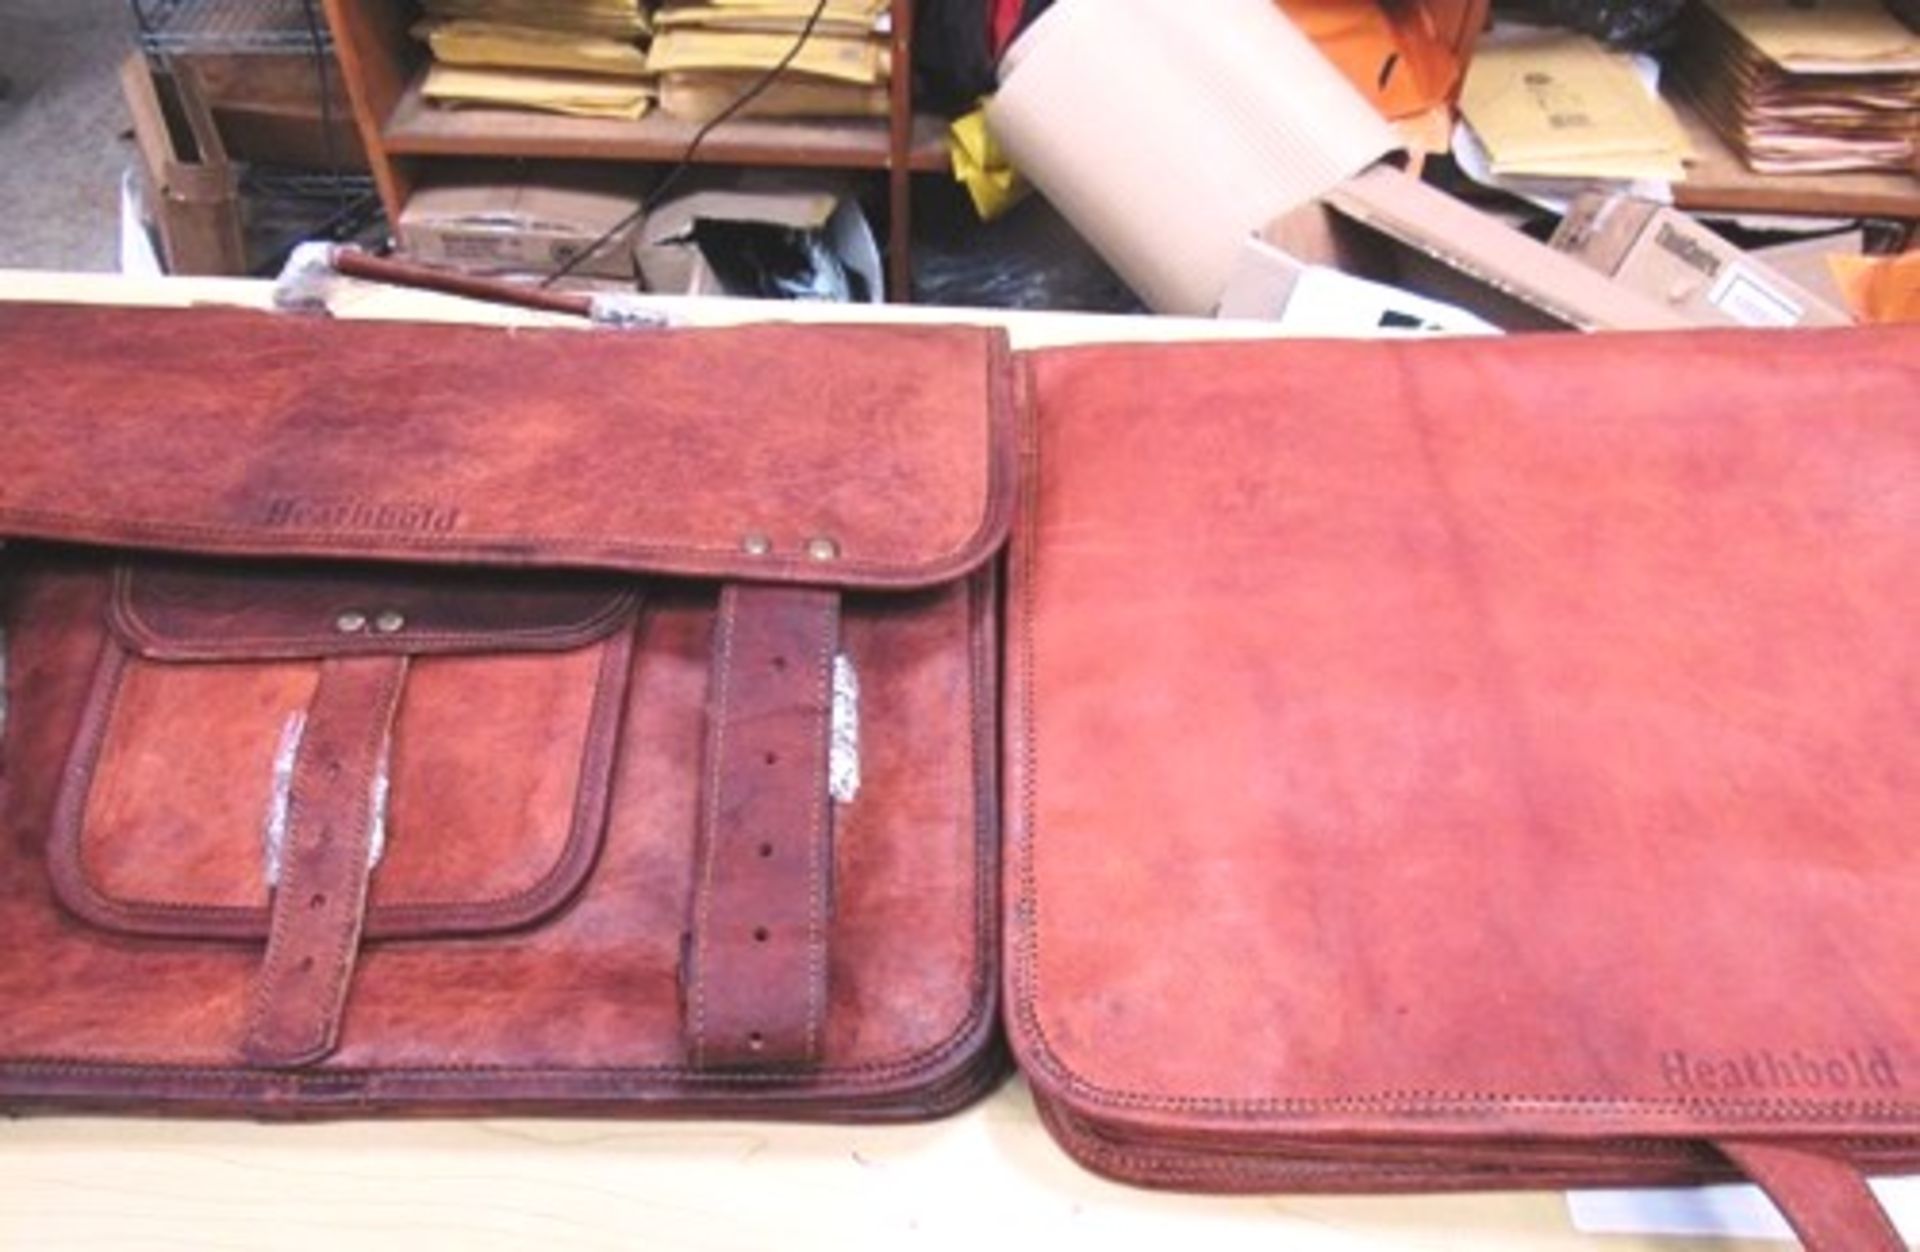 2 x Heathbold leather satchels - New, have personal names branded in (CS12B)